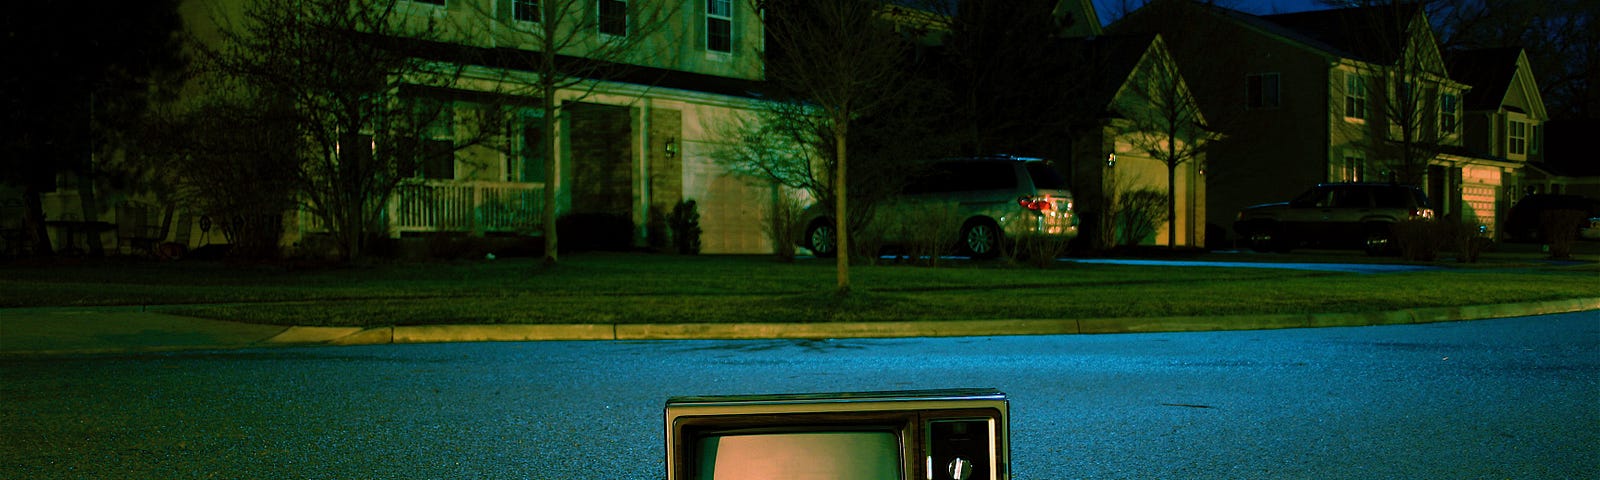 An old box-style TV on the ground in the middle of a suburban street